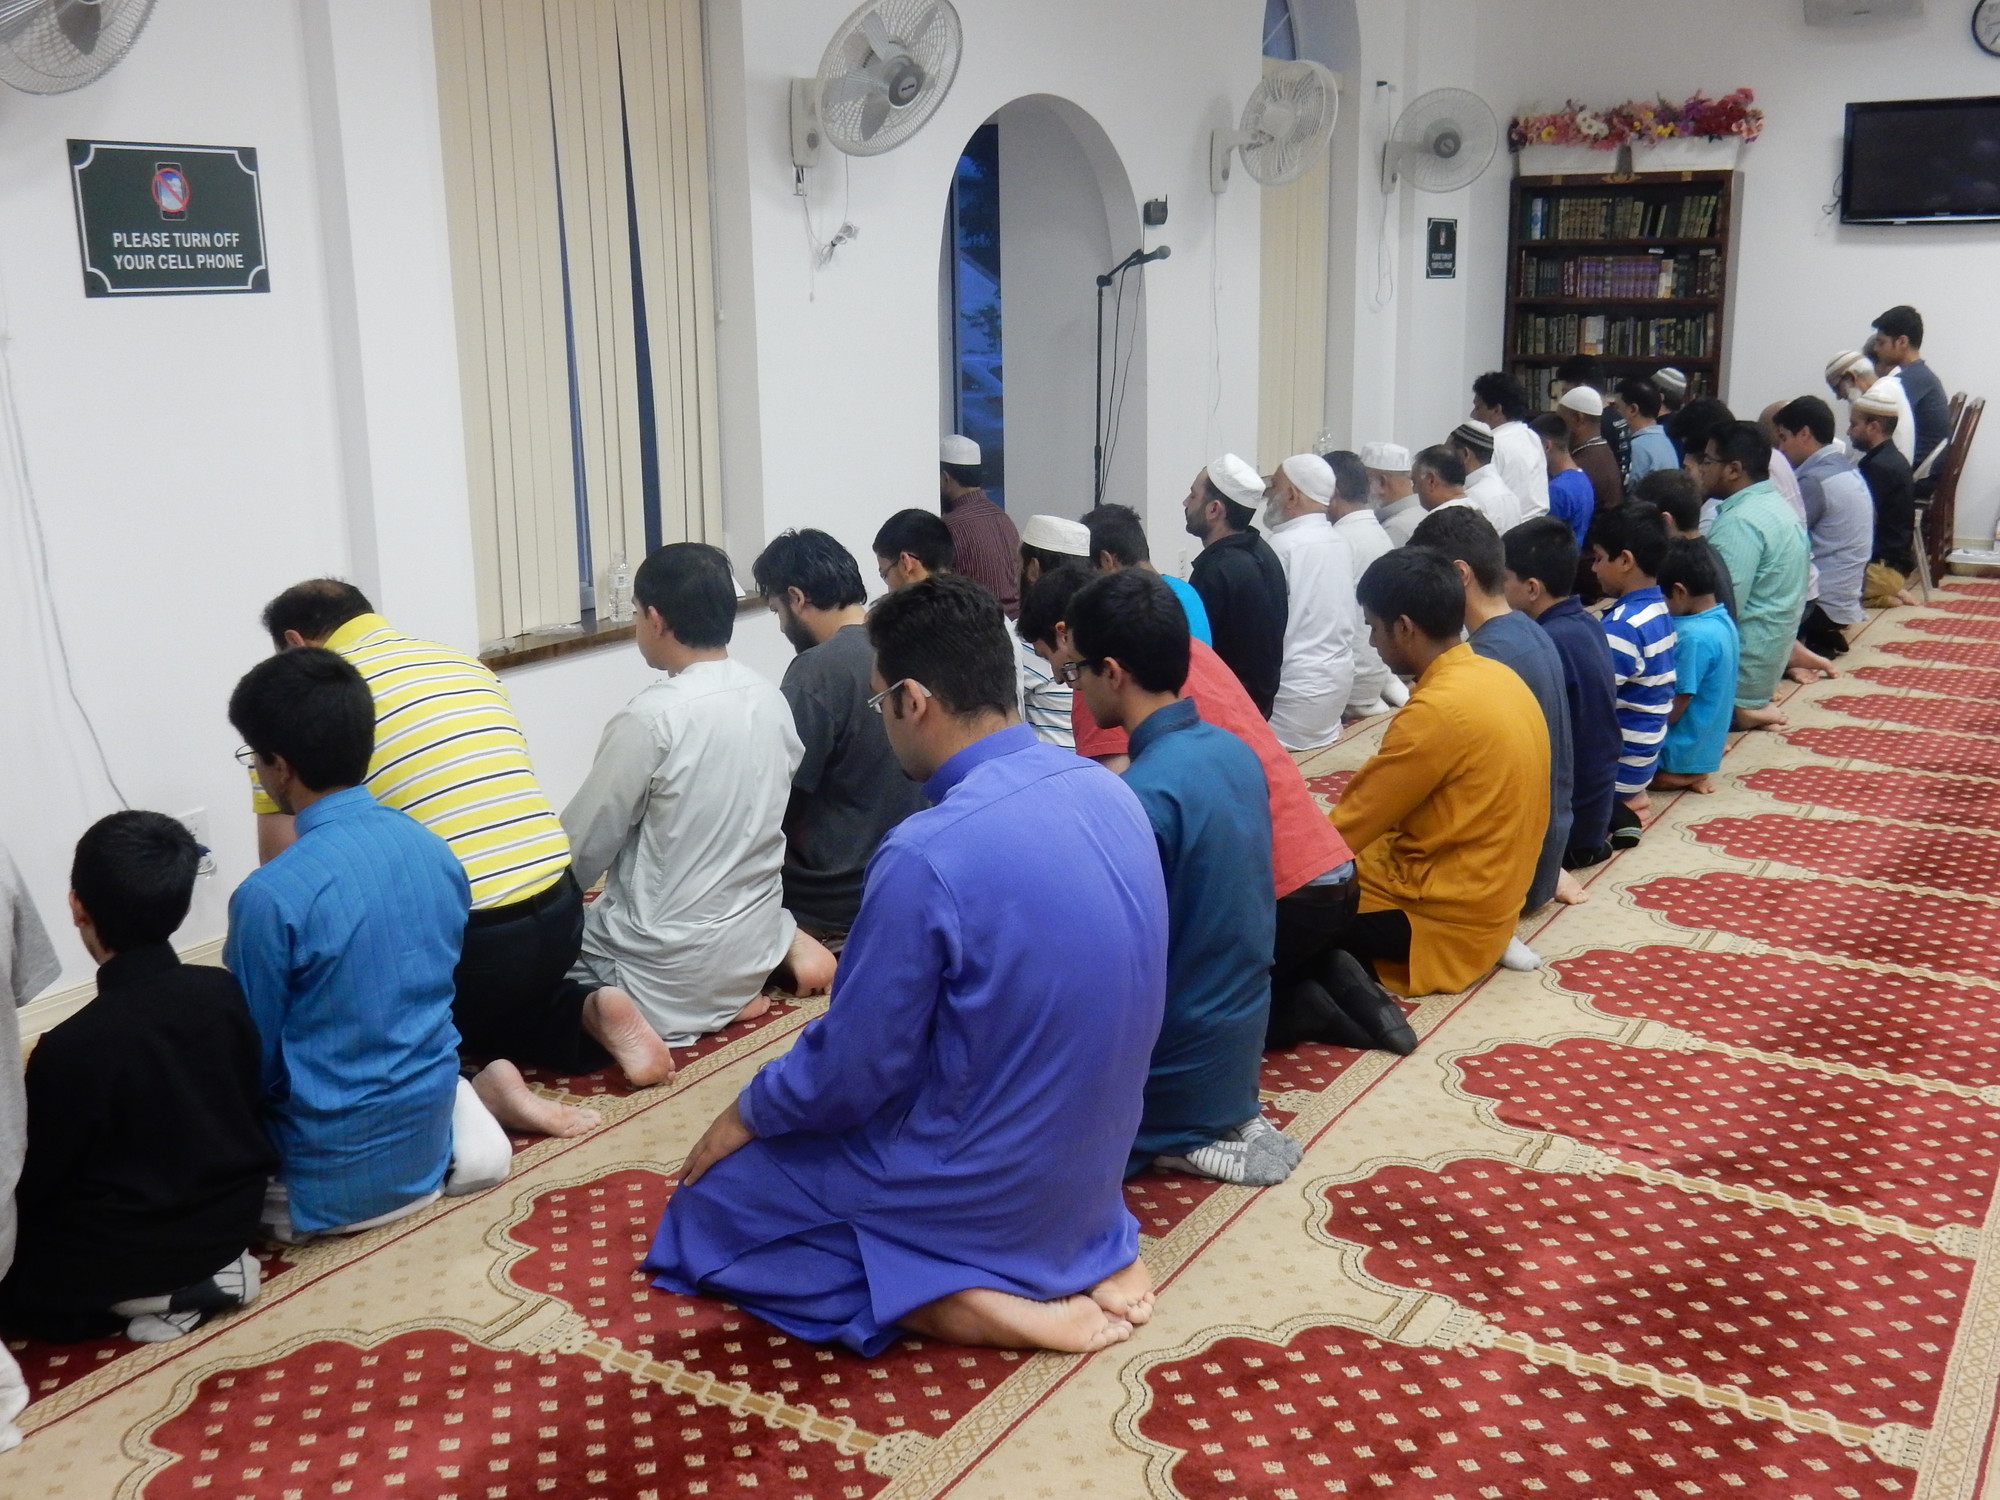 Long Island Muslim Society leaders said that interfaith services at the East Meadow mosque, like the one they hosted on June 22, bring community members of various faiths together.